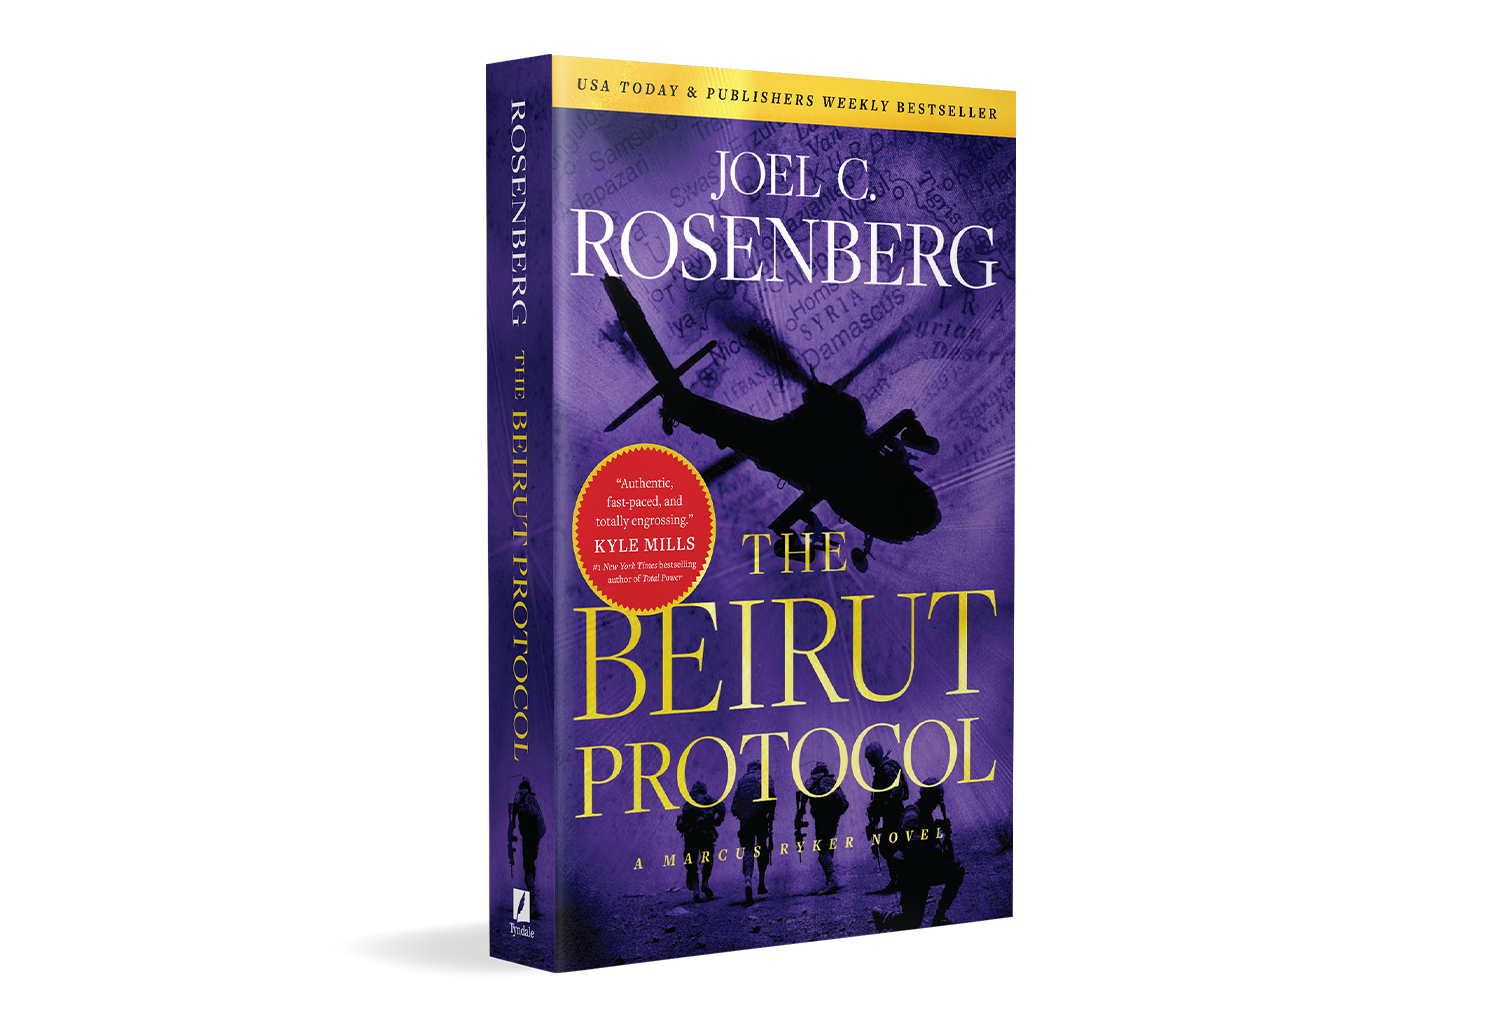 The Beirut Protocol by Joel Rosenberg from TBN